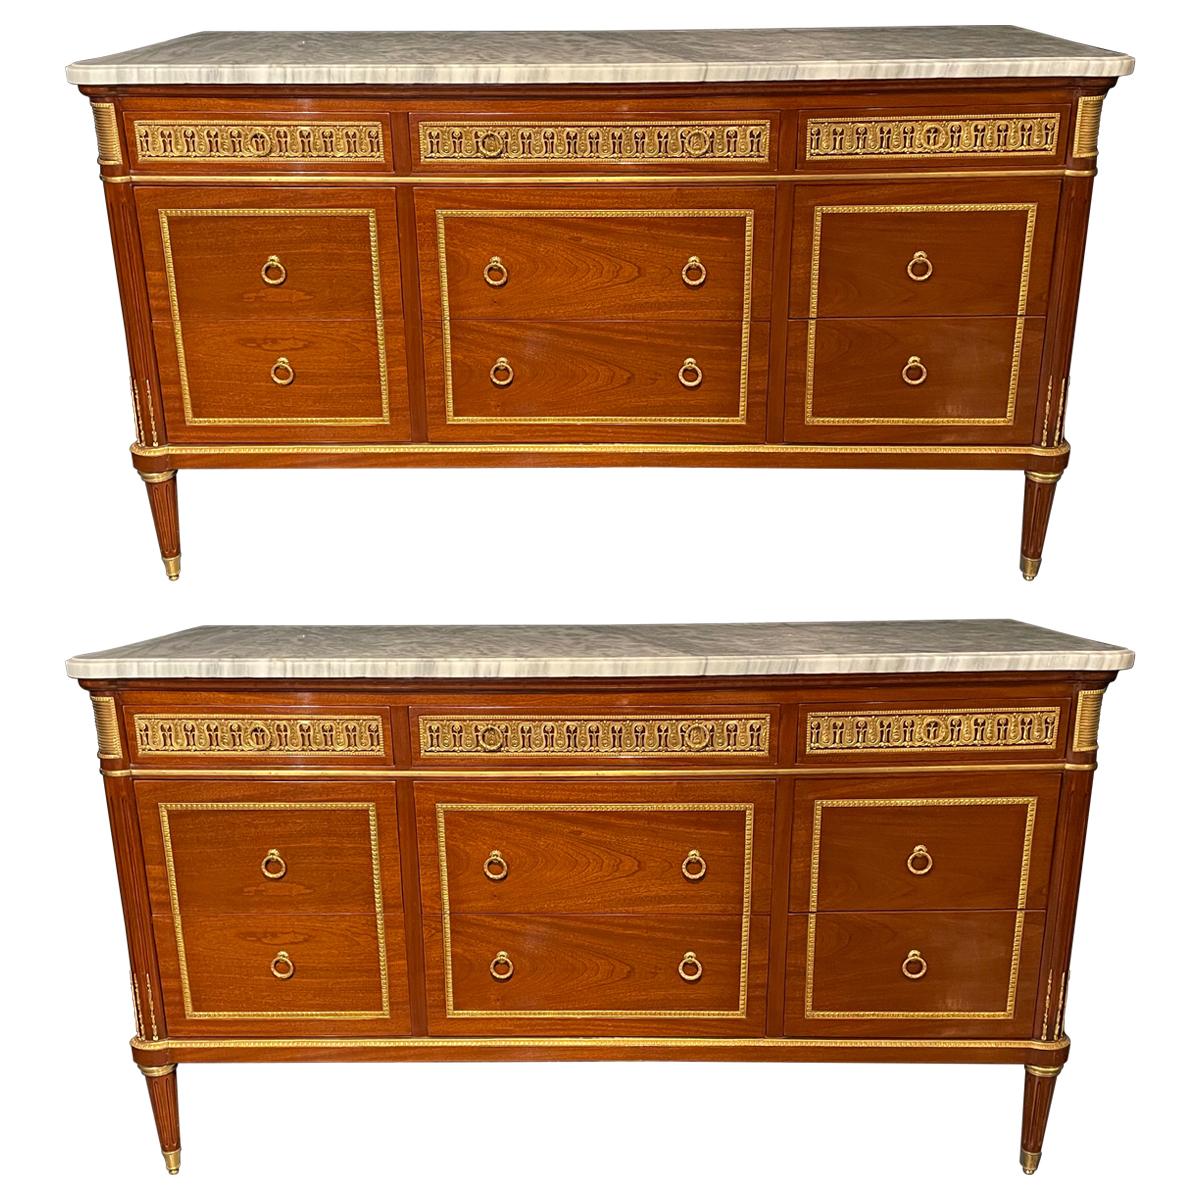 Pair of Monumental French Commodes in the Manner of Maison Jansen